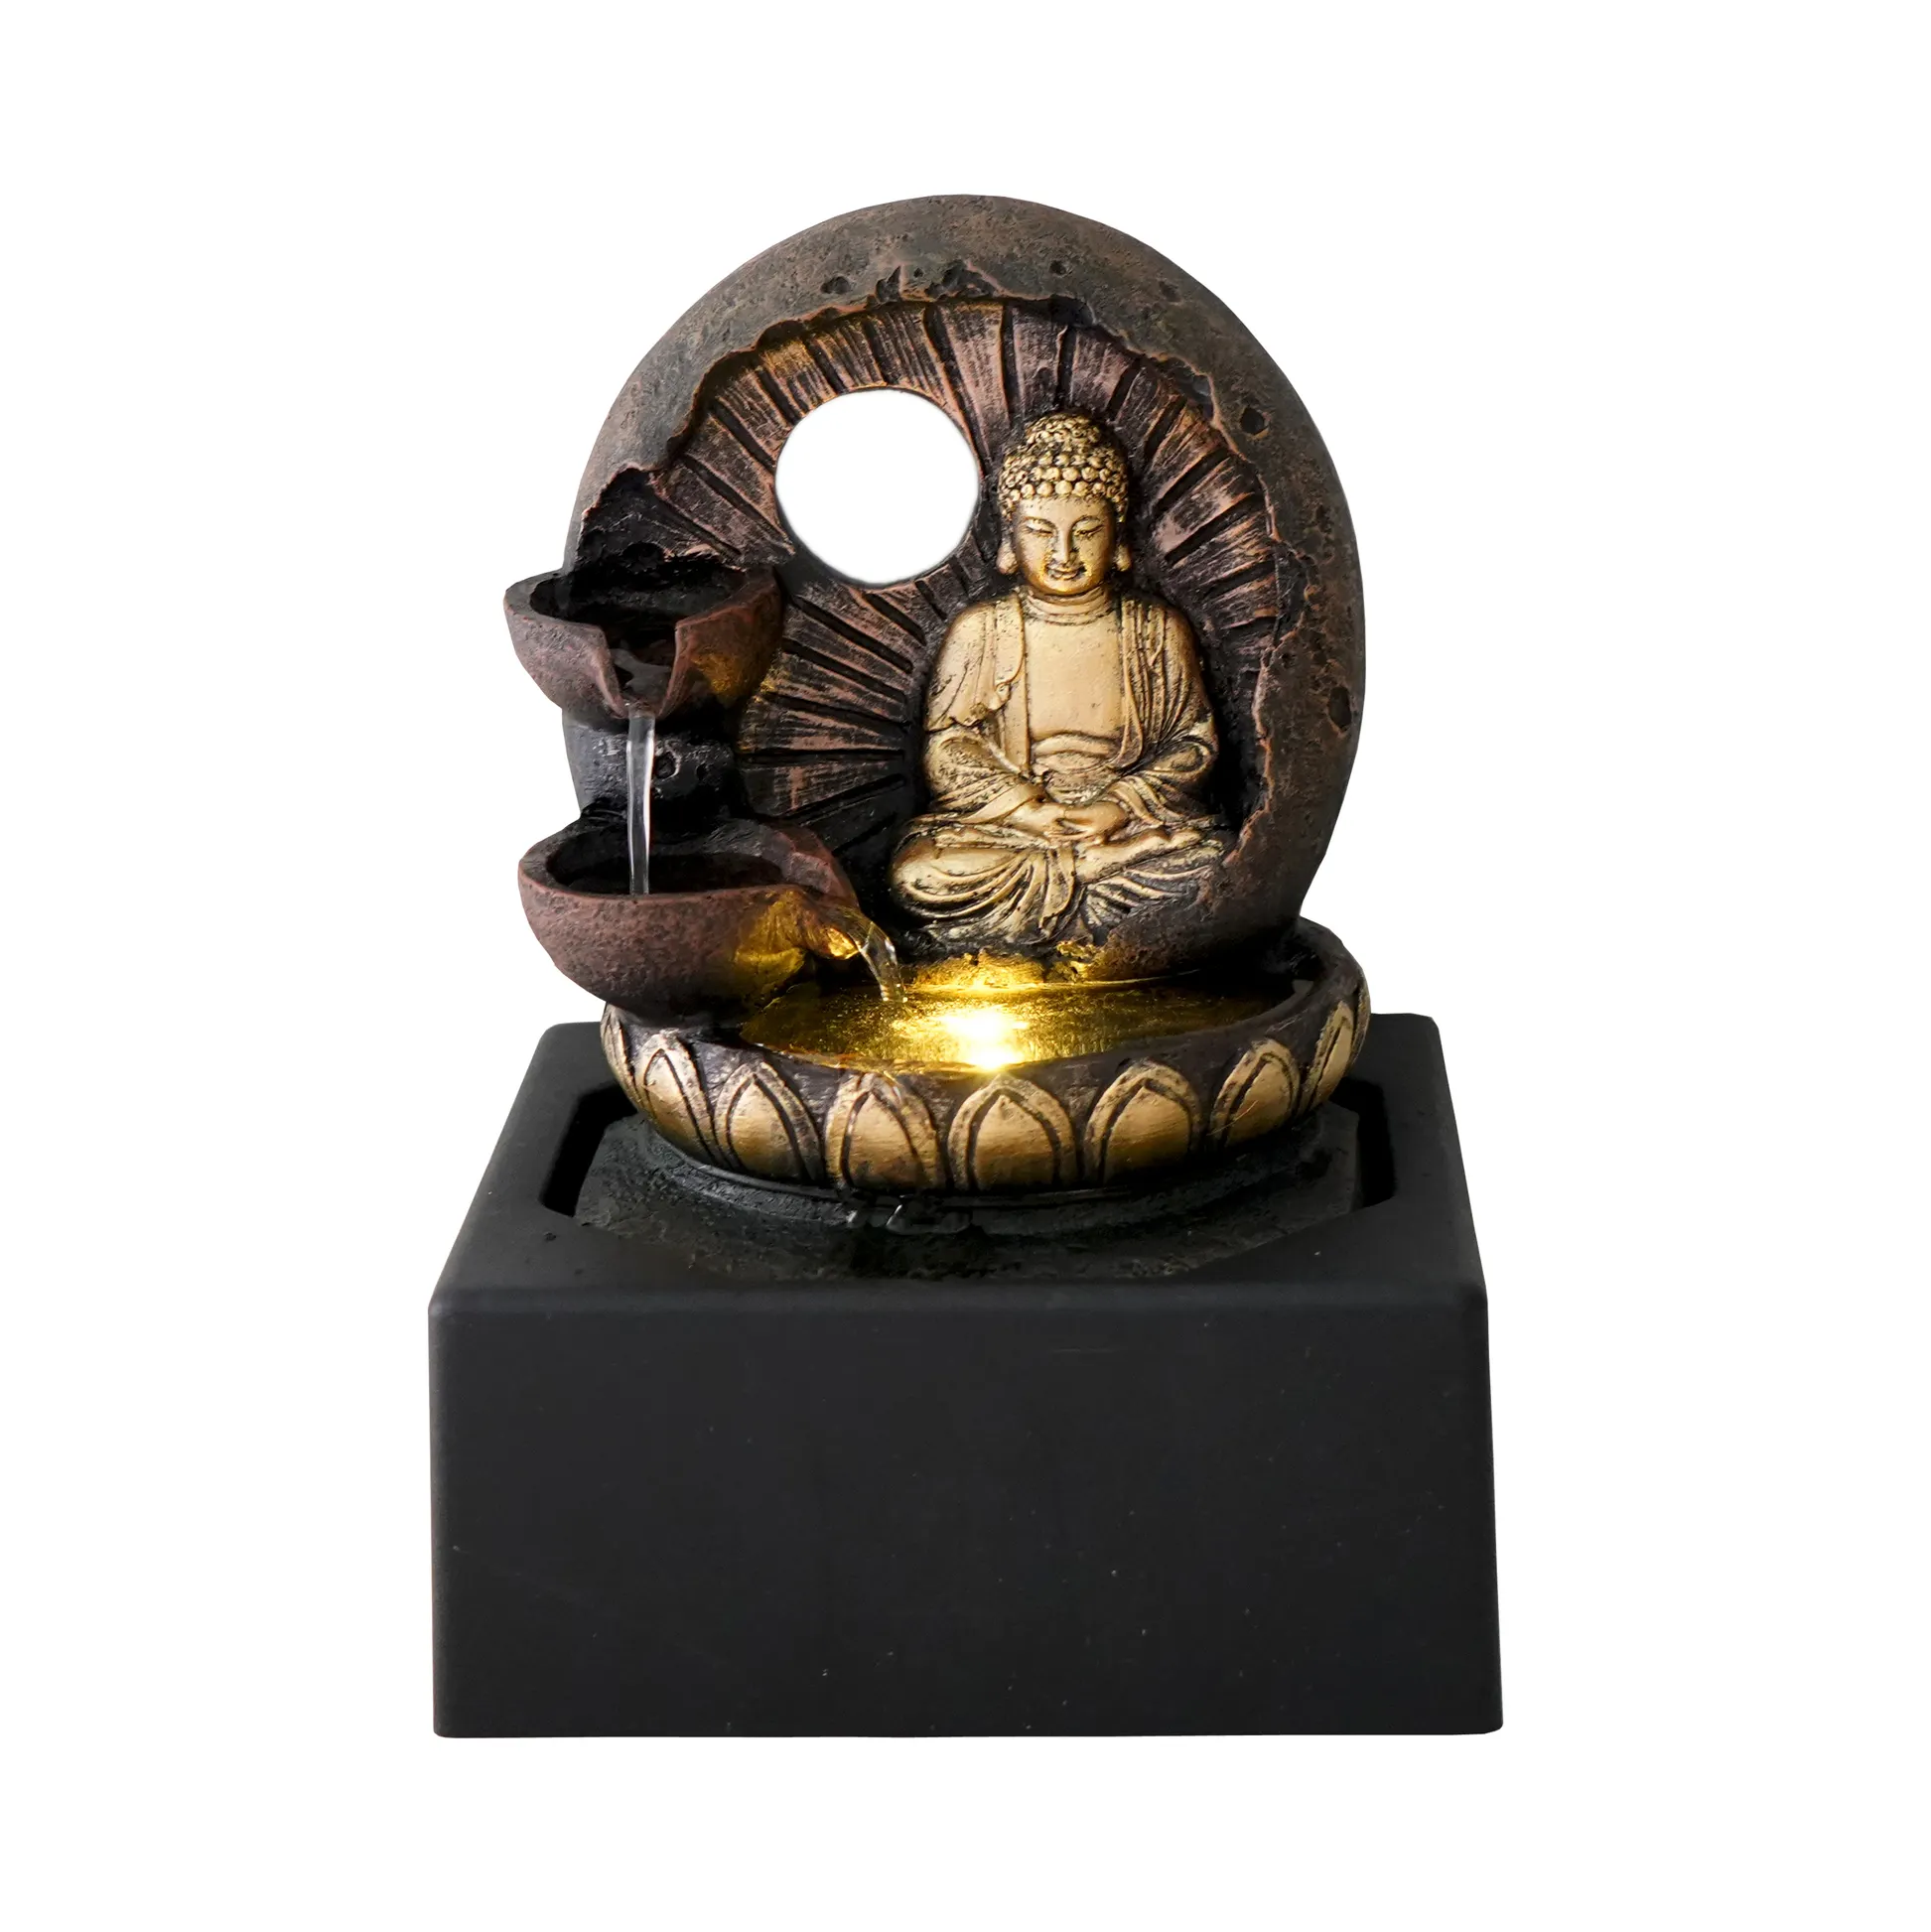 Antique Indoor Tabletop Waterfall Bowl Fountain Tiers Water Buddha Zen Fountain Feature With LED Light